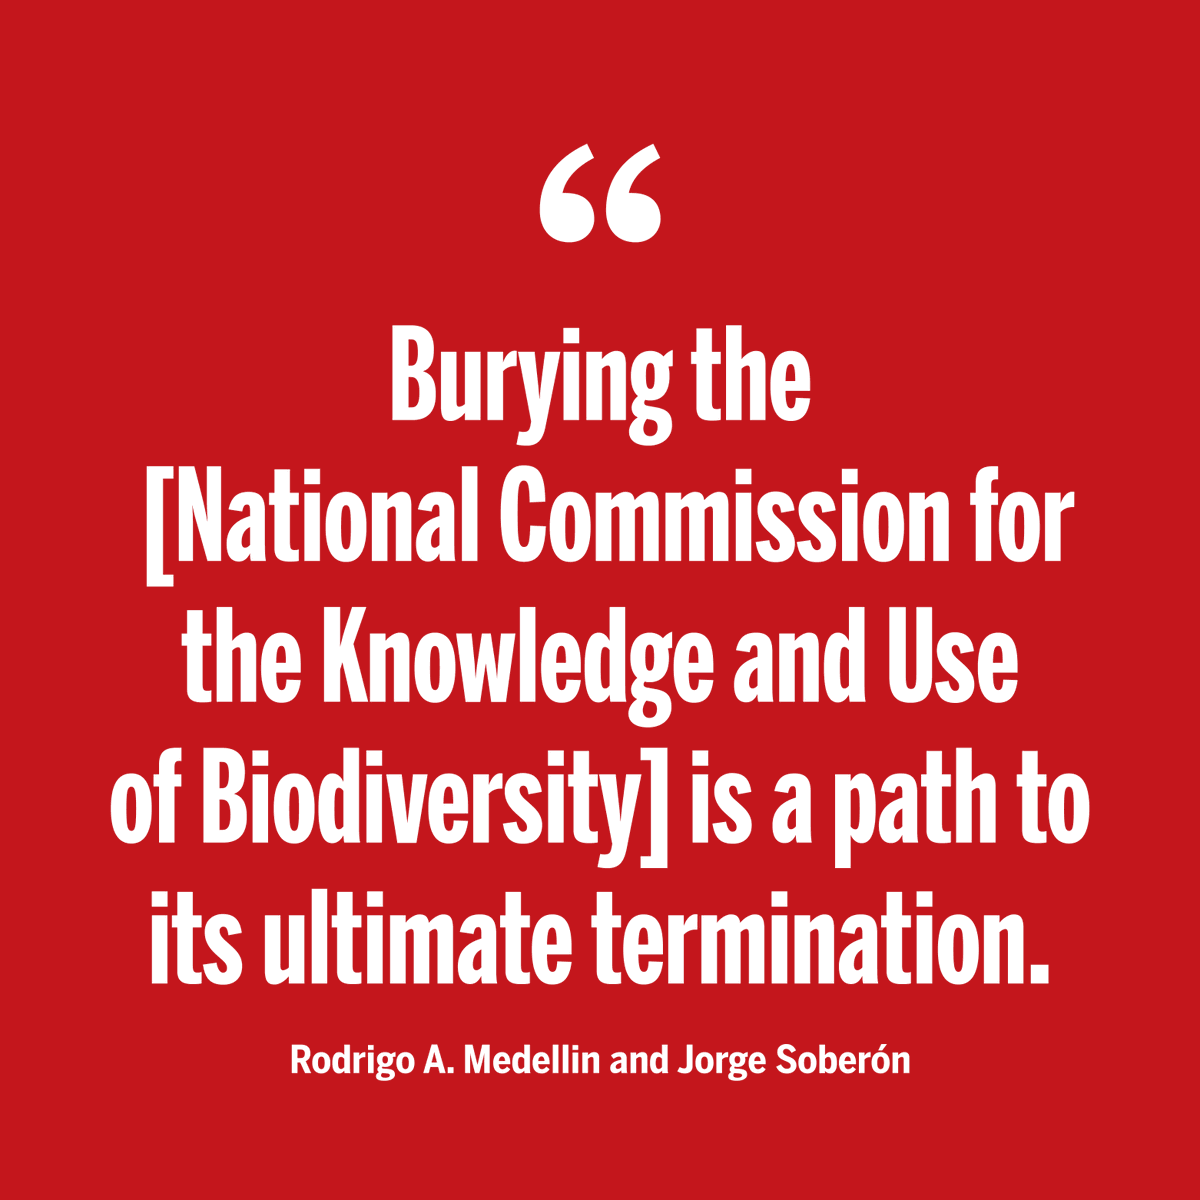 'It is time again for Mexico’s scientists, Mexico’s population, and the world to speak out against destroying [the National Commission for the Knowledge and Use of #Biodiversity],' write Rodrigo A. Medellin and Jorge Soberón in a new #ScienceEditorial. scim.ag/6zk